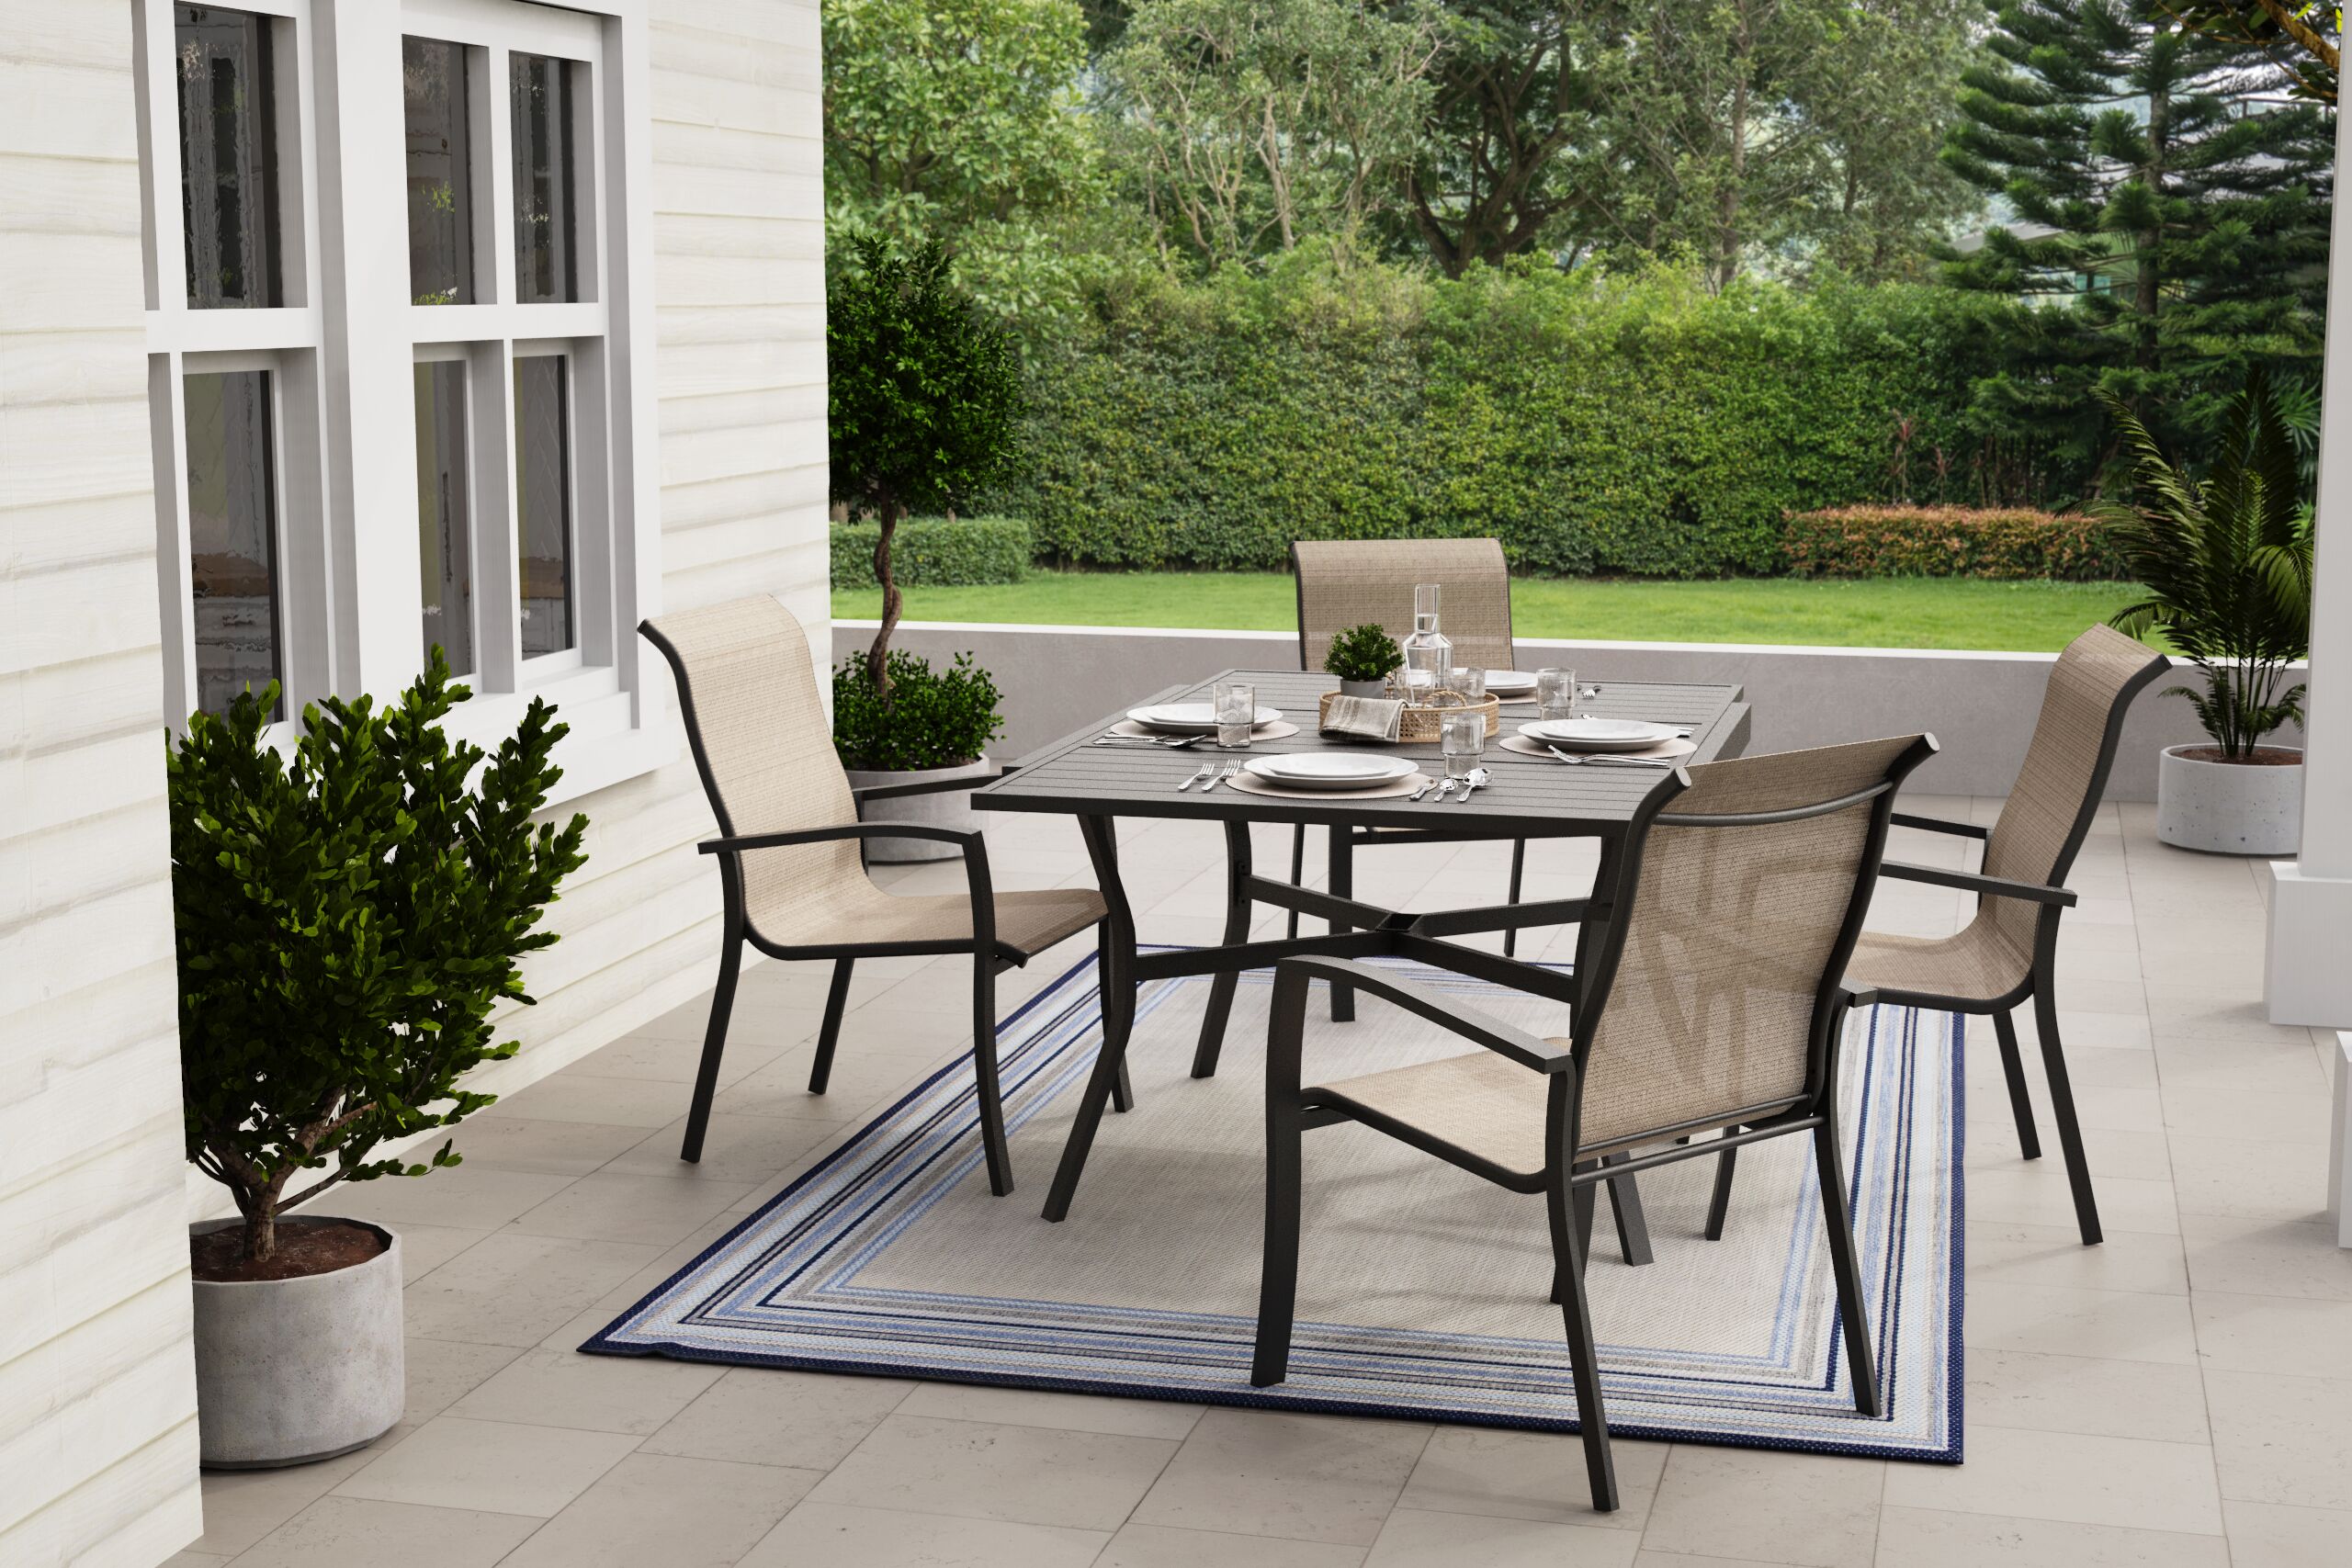 Lowes Patio Furniture Clearance  Patio furniture for sale, Clearance patio  furniture, Patio furniture